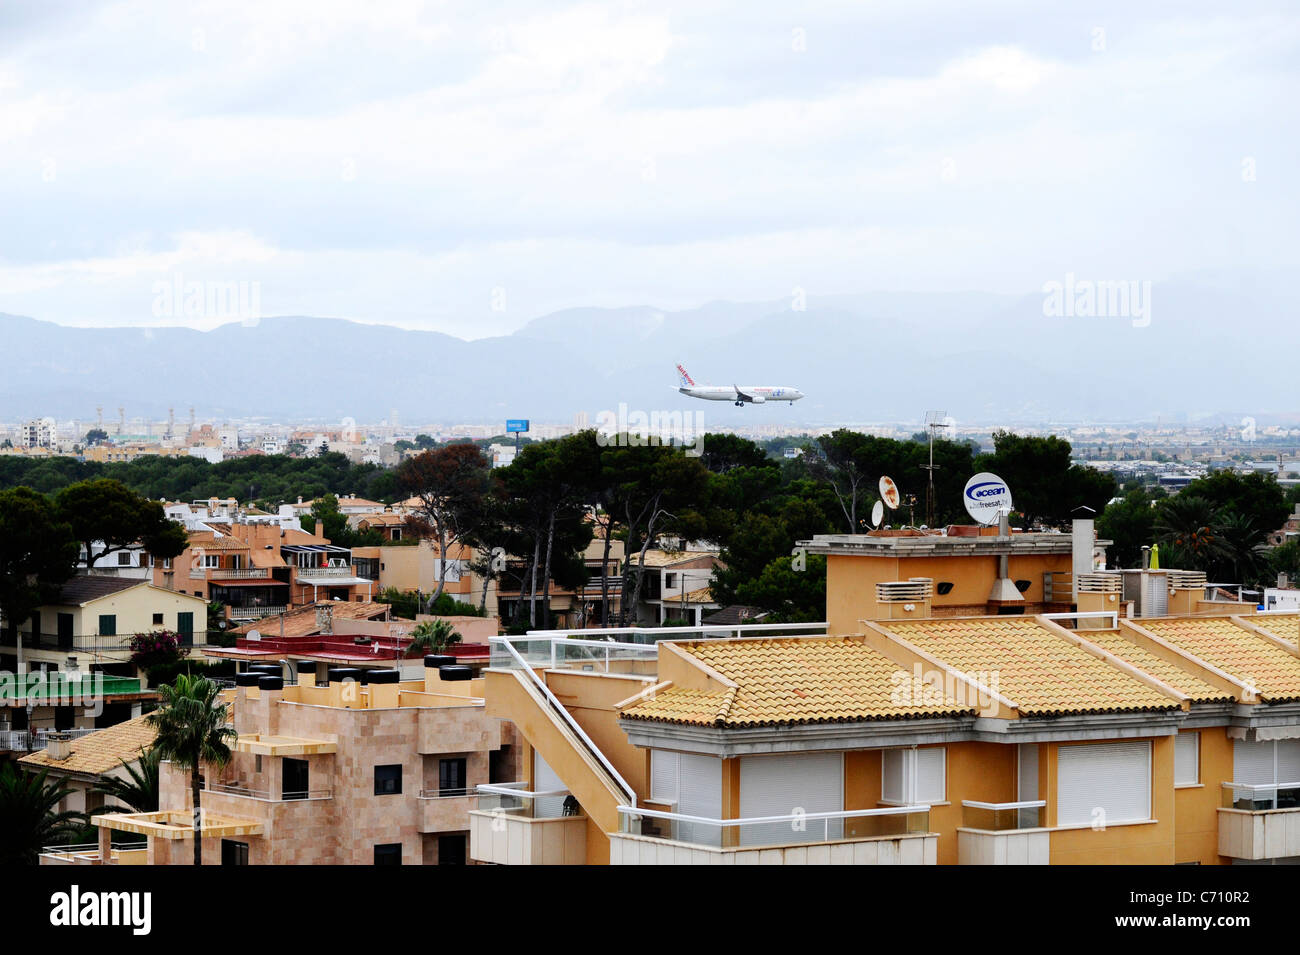 An Air Europa plane coming in to land at Palma airport, Mallorca. Stock Photo